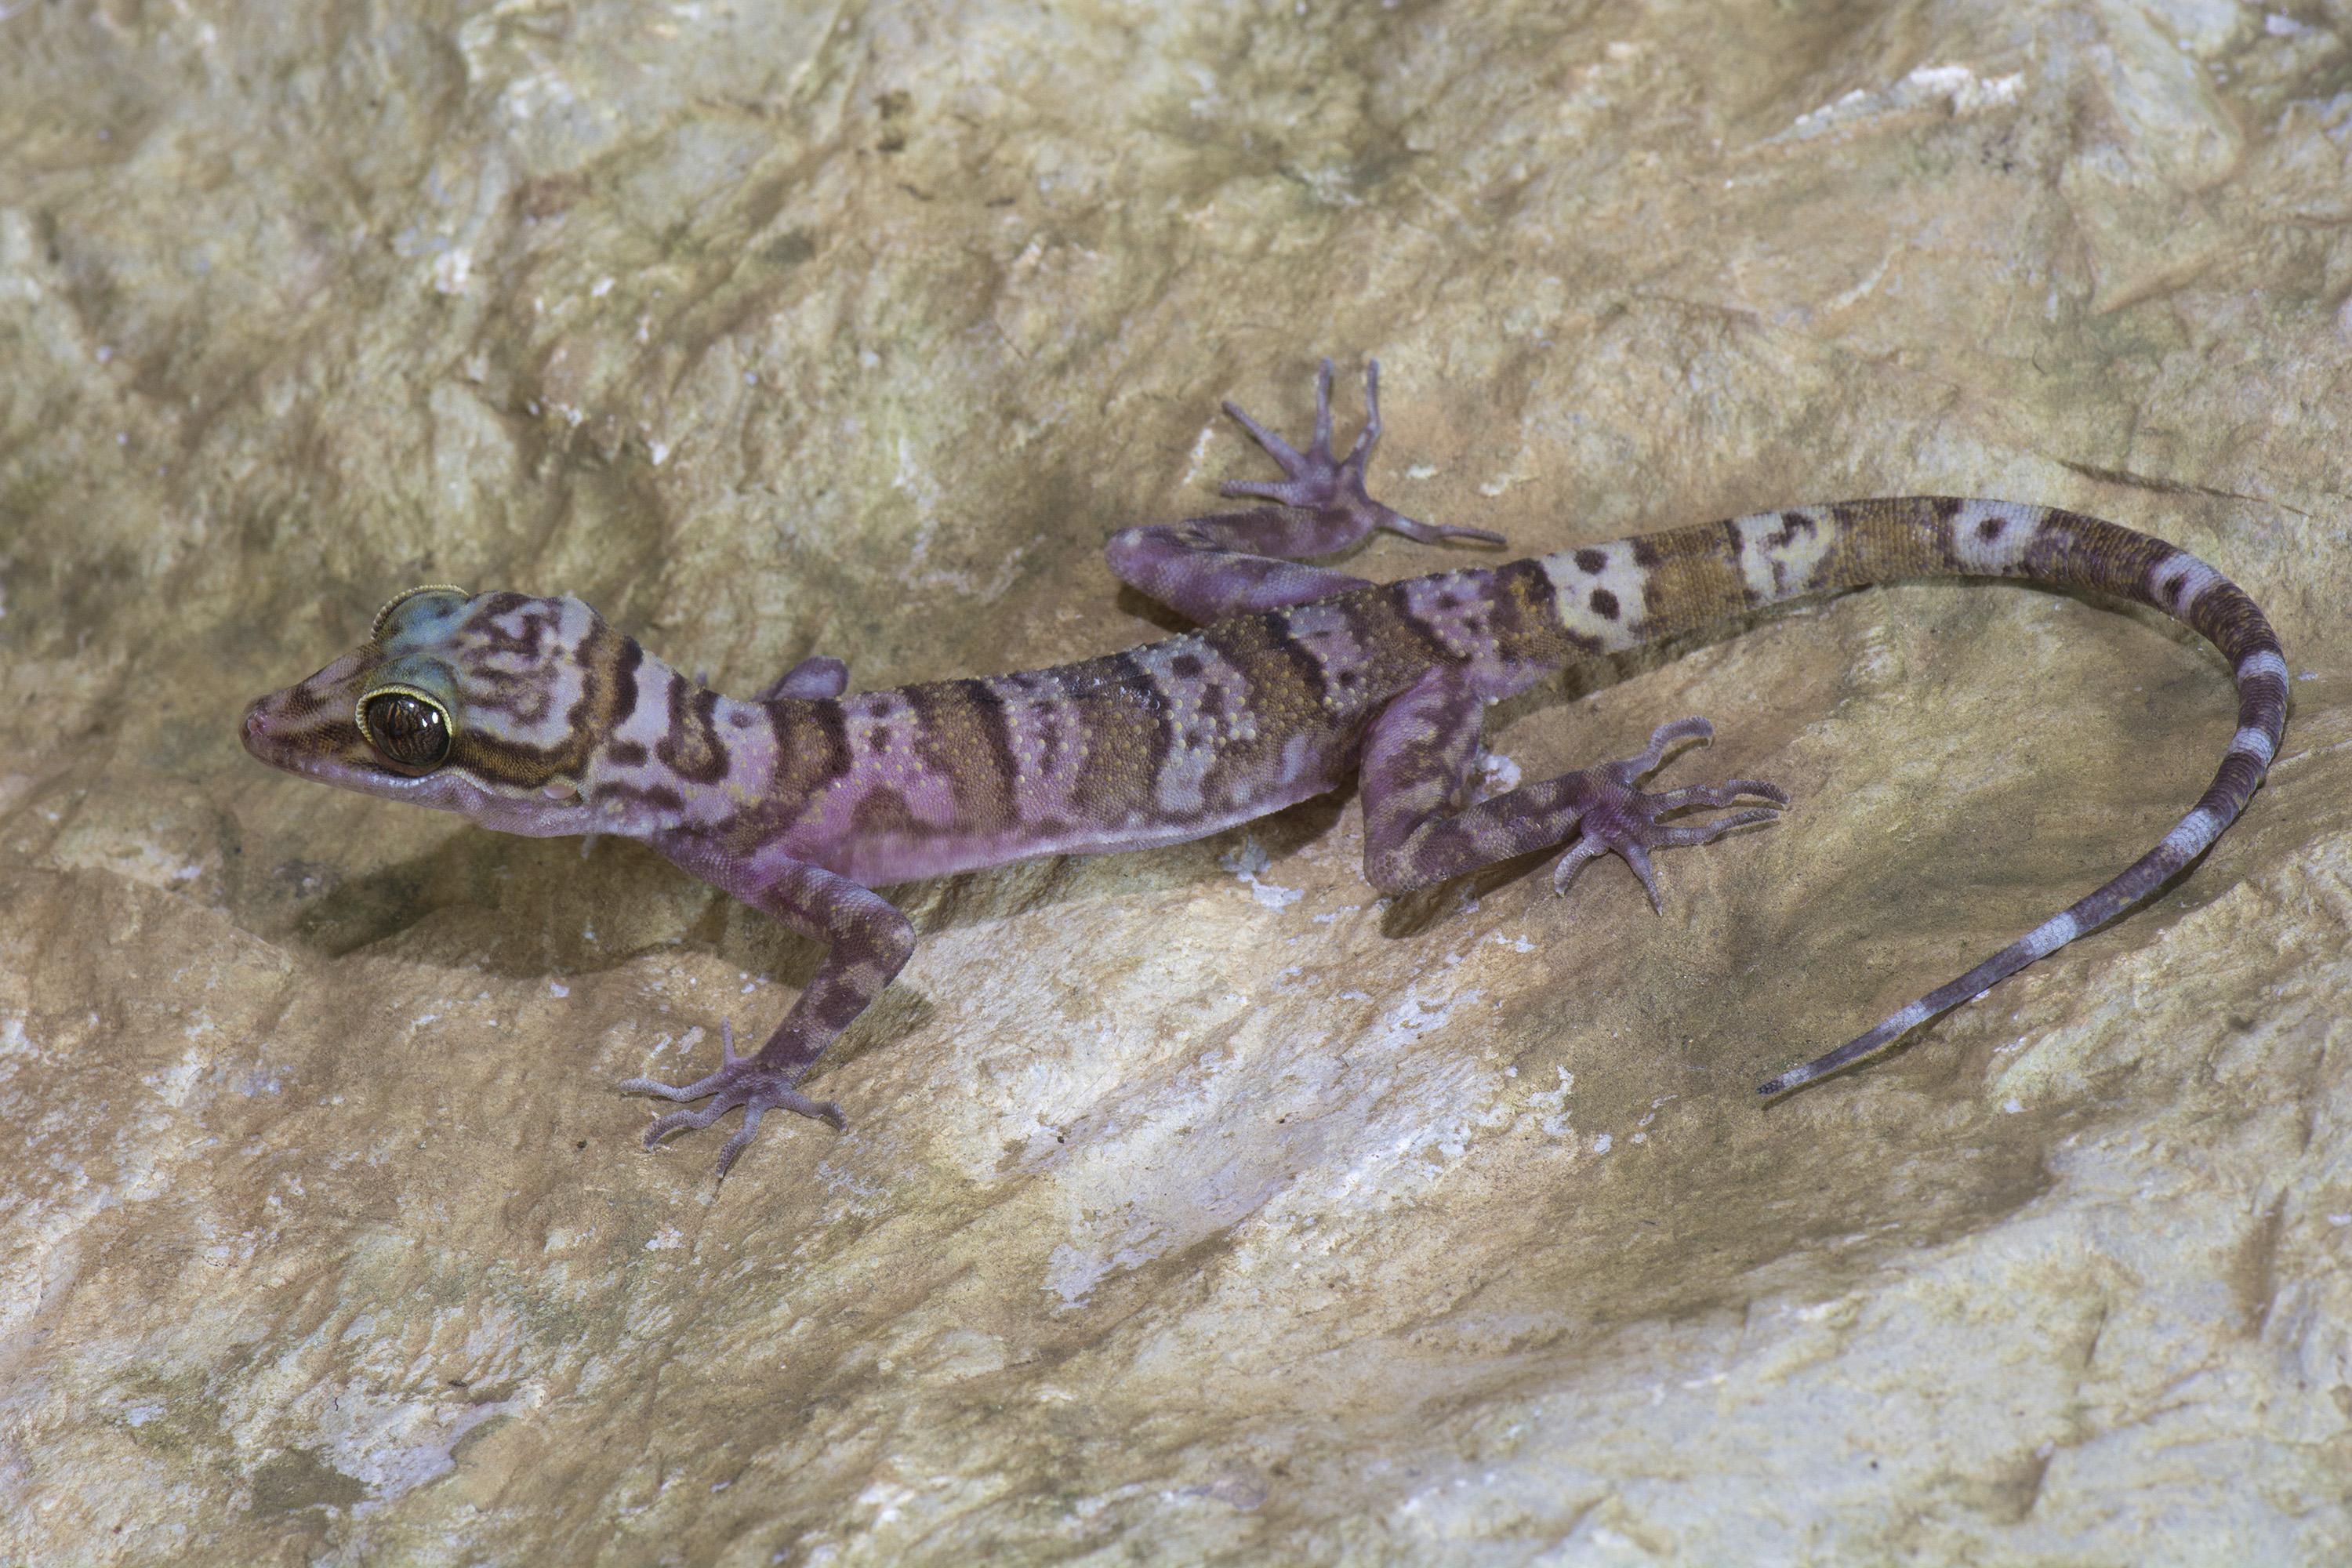 A new species of Cyrtodactylus, a bent-toed gecko, discovered in Myanmar. Photo: Lee Grismer.